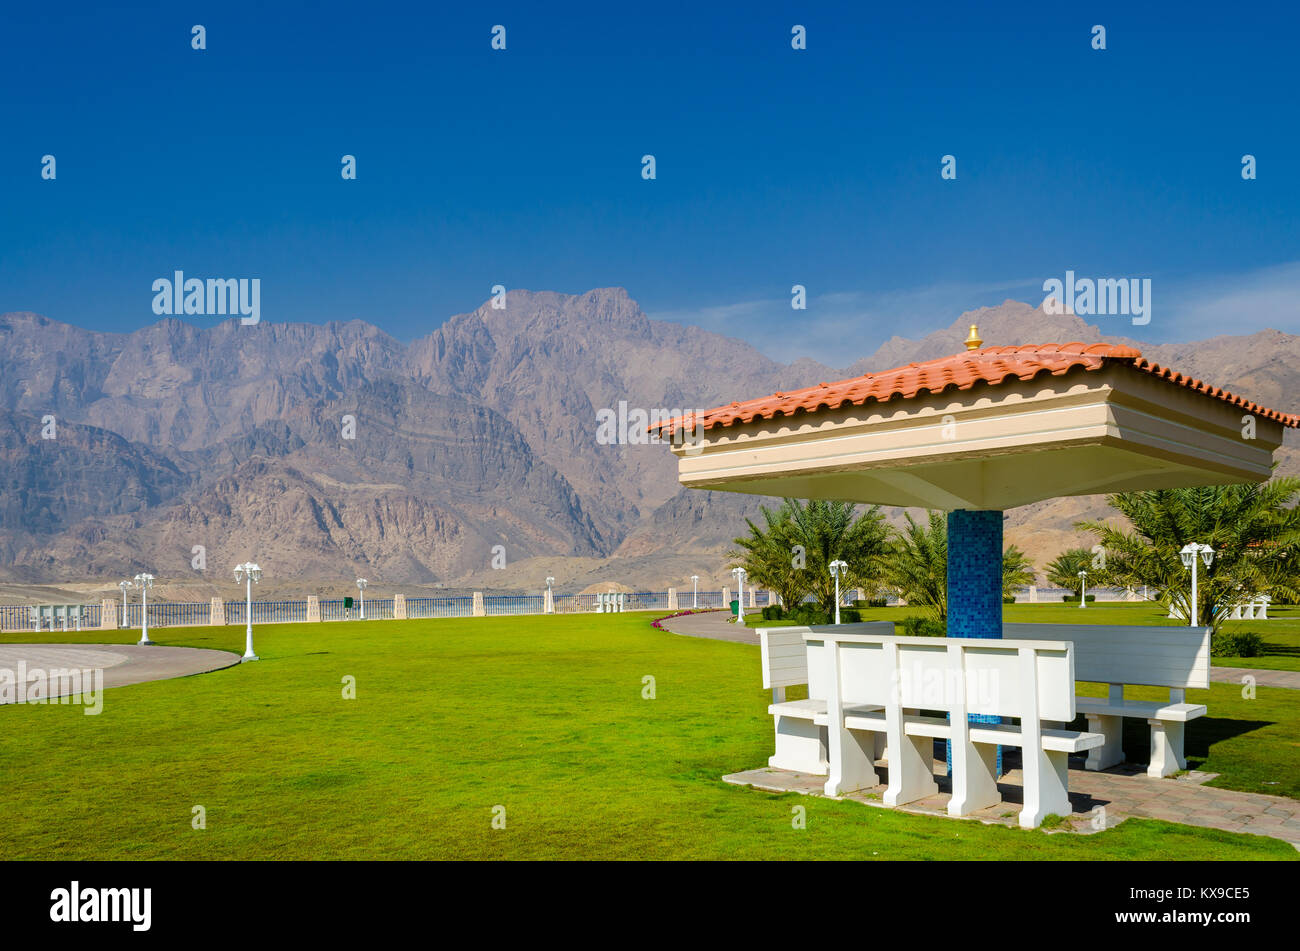 Covered benches for an ideal picnic spot with green lawn with mountains and a clear blue sky in the background. Stock Photo